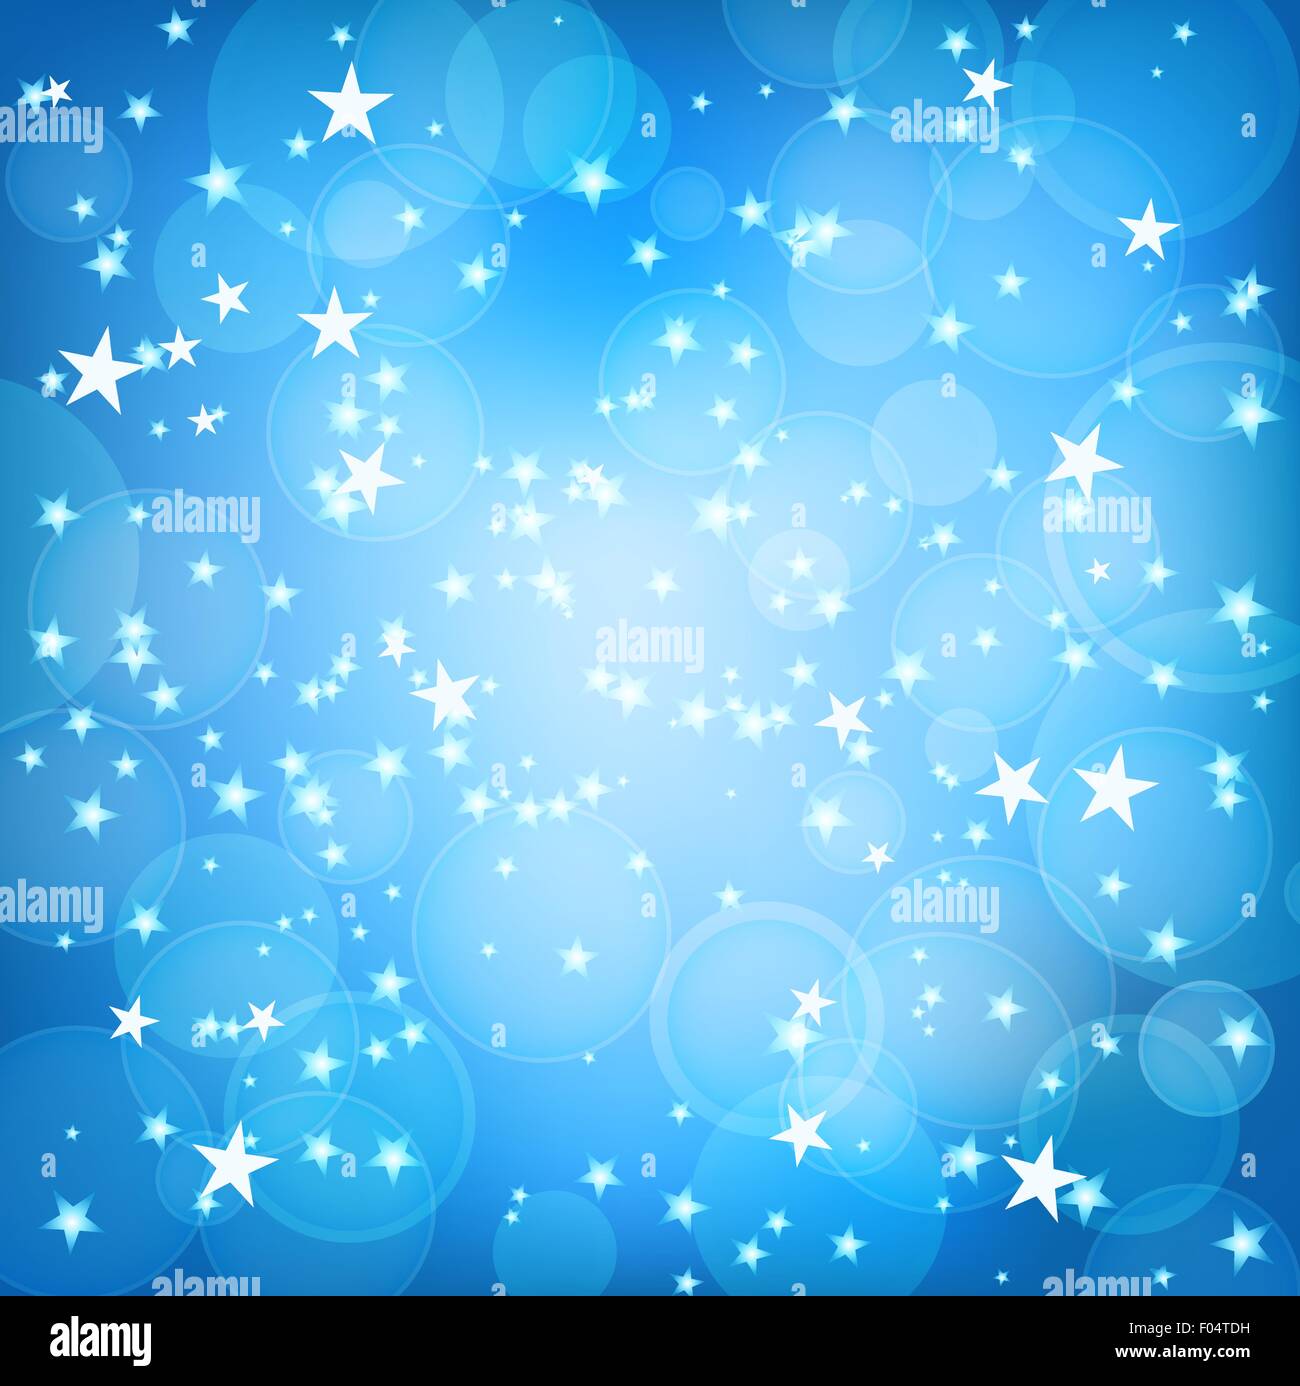 blue square background with stars Stock Vector